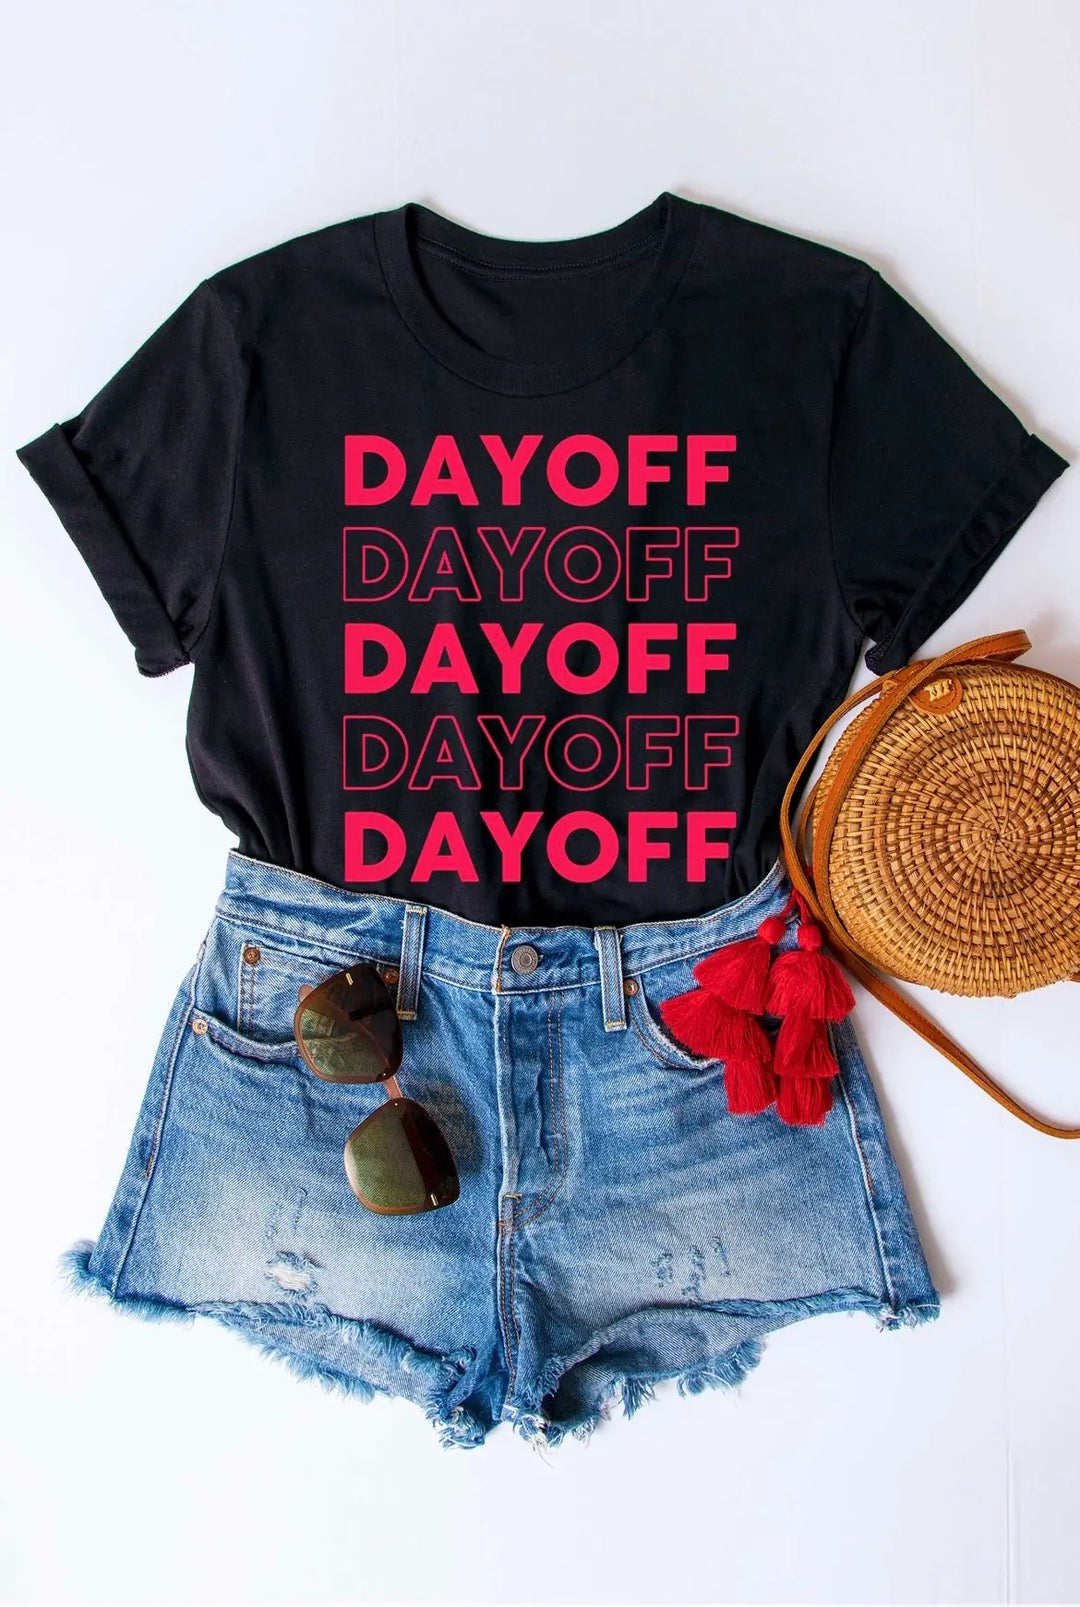 DAY OFF Tee - SurgeStyle Boutique